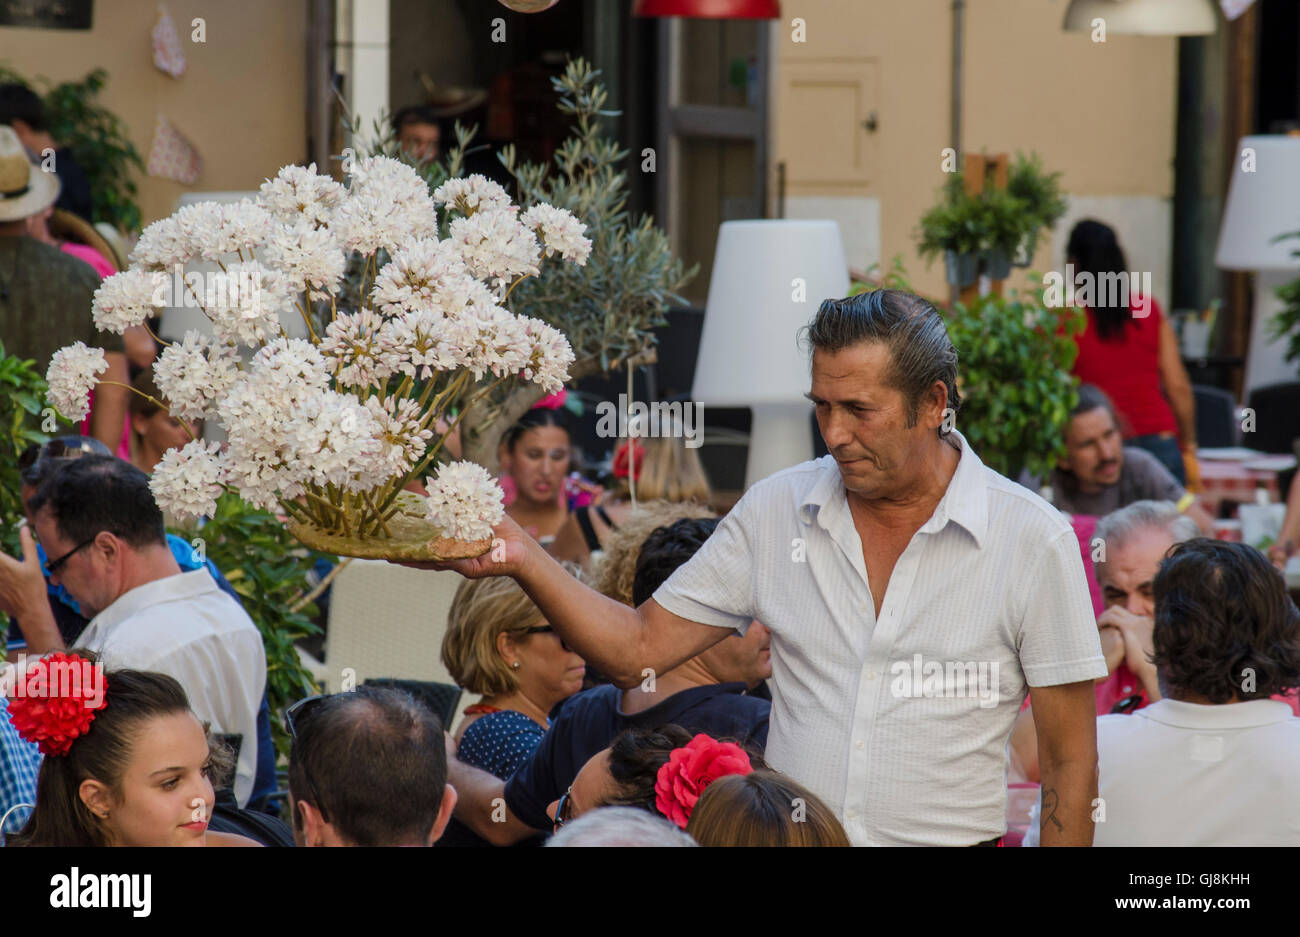 Malaga, Andalusia, Spain. 13th Aug, 2016. Man selling biznaga, jasmine flowers, during start of Annual Feria of Malaga, Southern Spain's biggest summer fair starts. The feria celebrations. Credit:  Perry van Munster/Alamy Live News Stock Photo